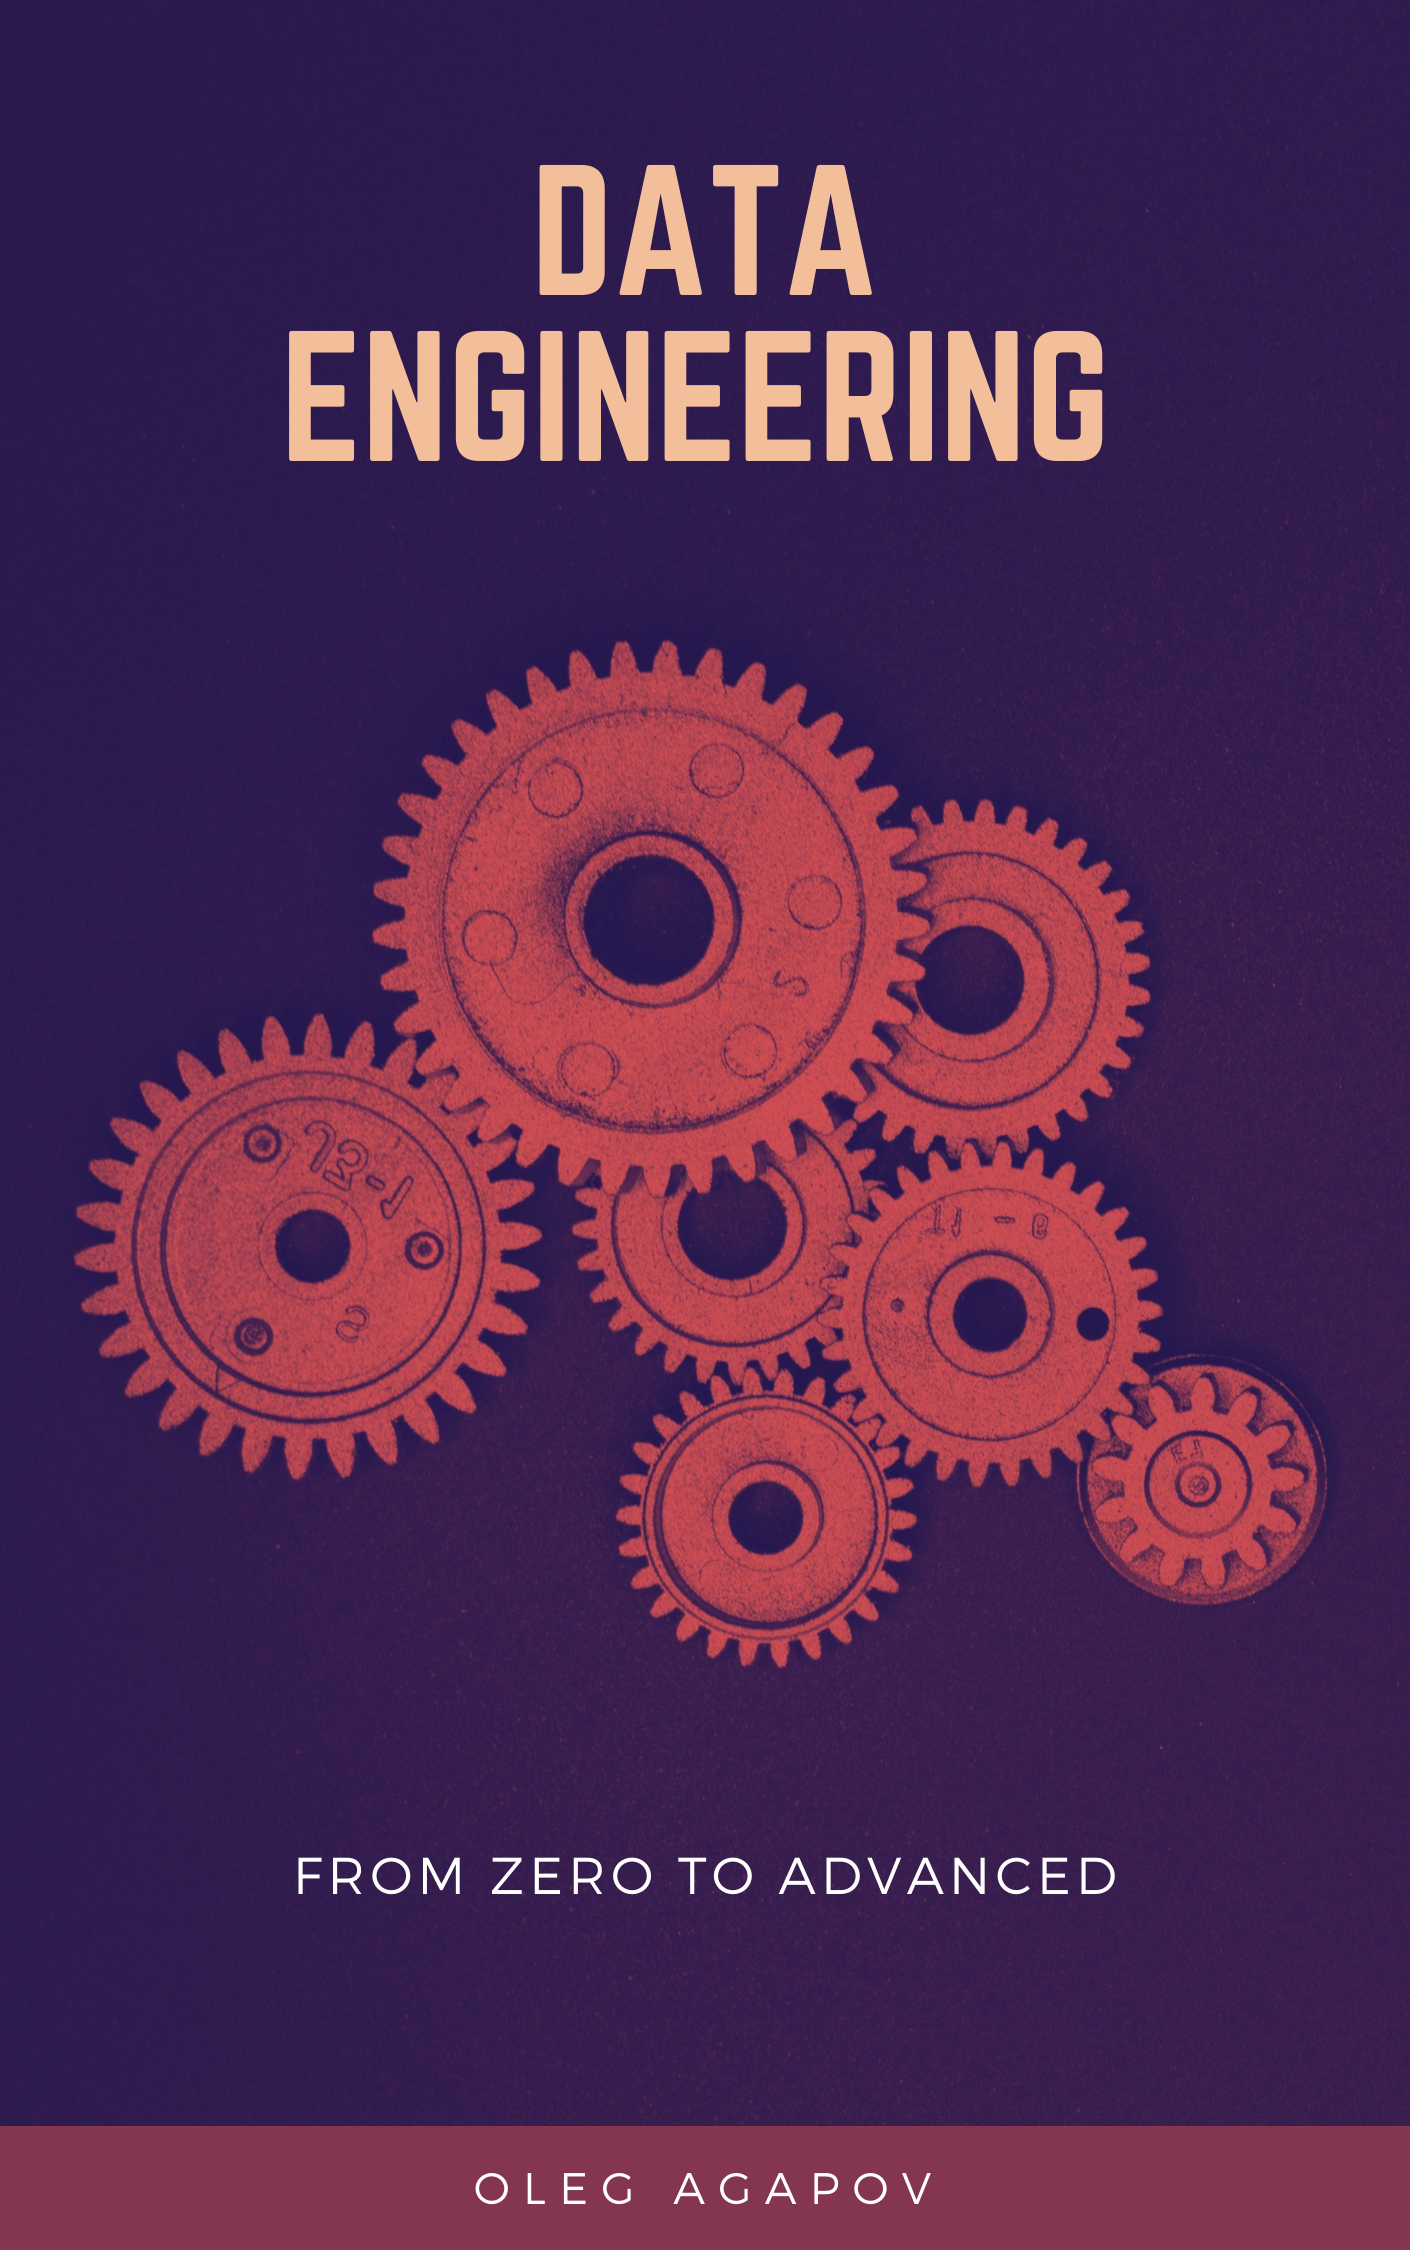 Data engineering book cover